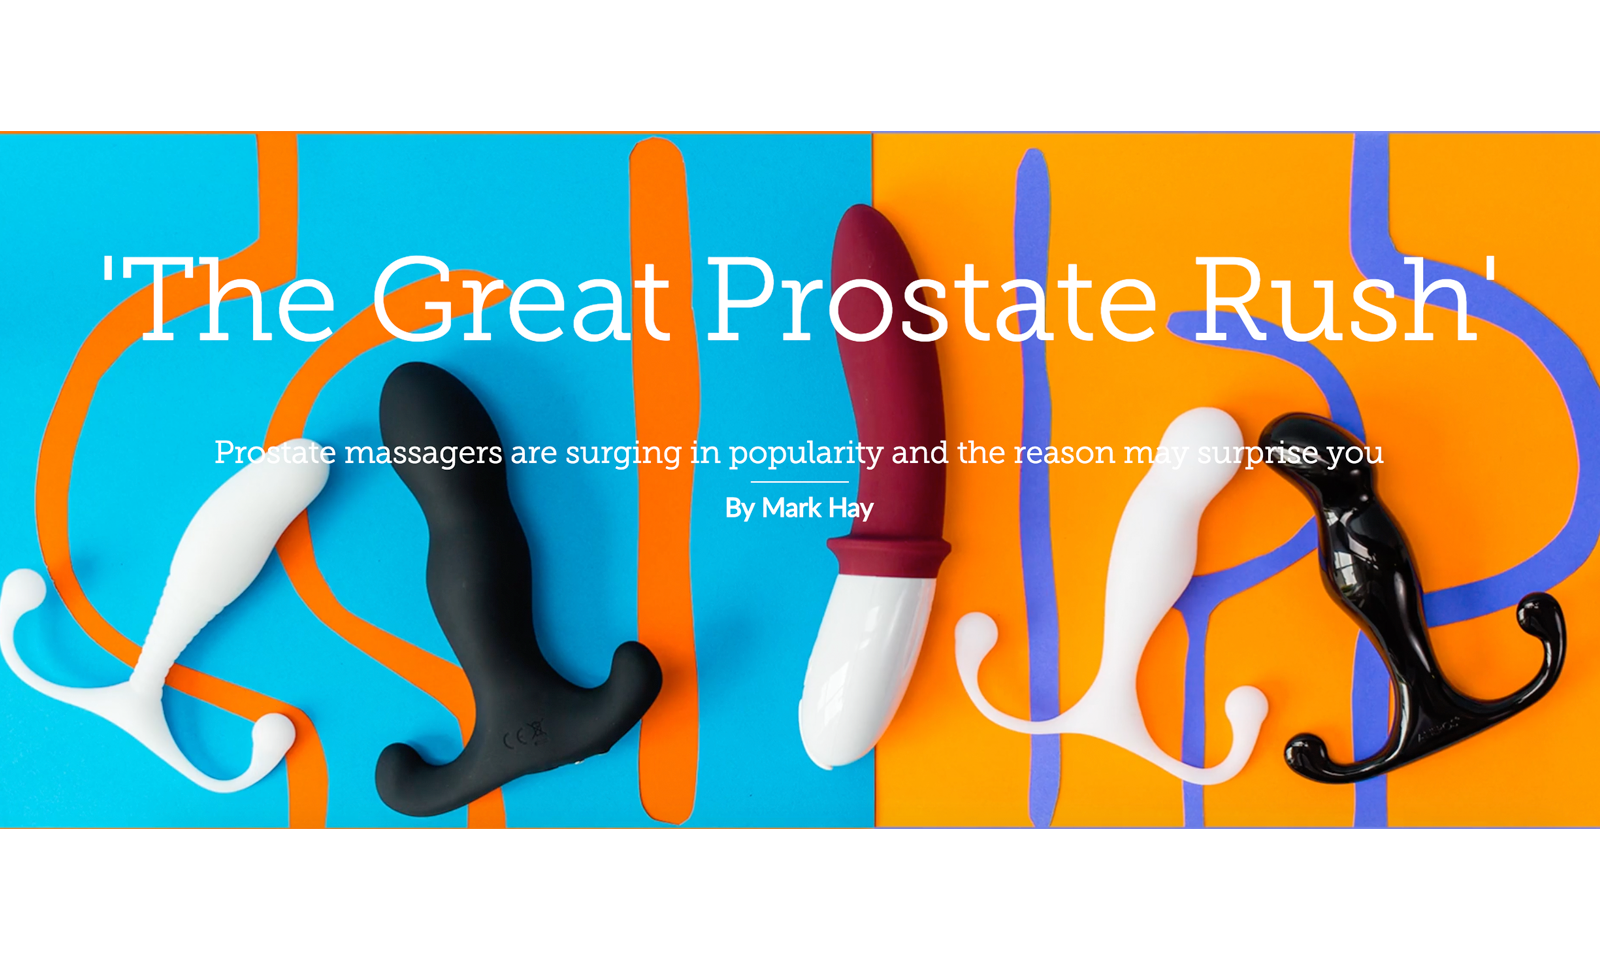 Prostate Massagers Featured in New Mashable Article